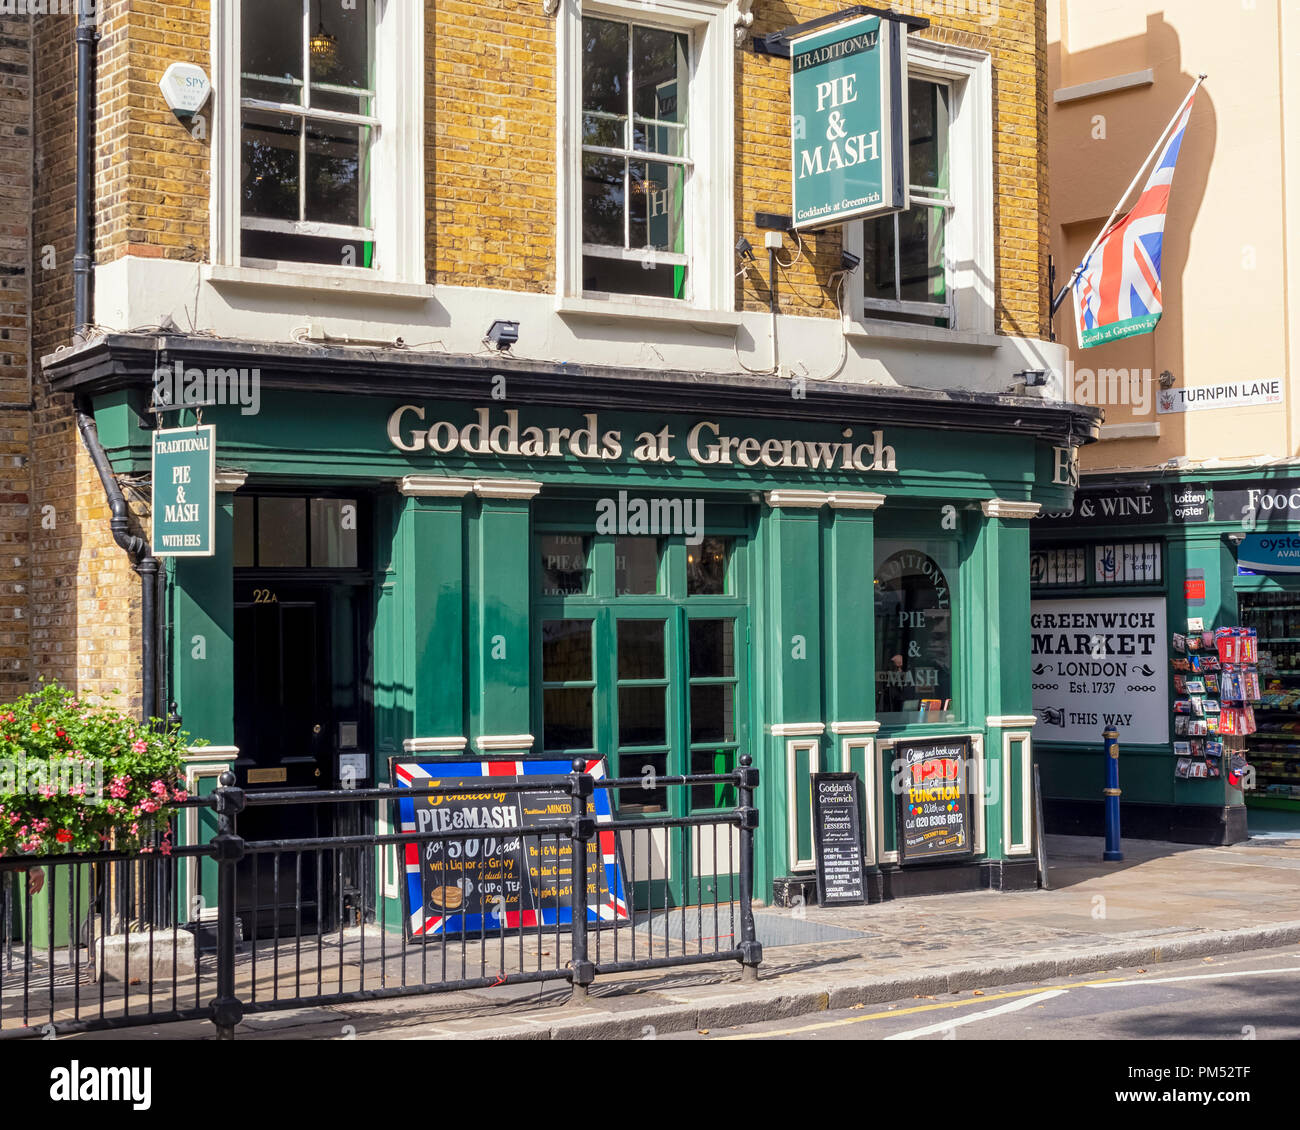 LONDON, UK - AUGUST 25, 2018:  View of Goddards Traditional Pie and Mash restaurant in Greenwich Stock Photo